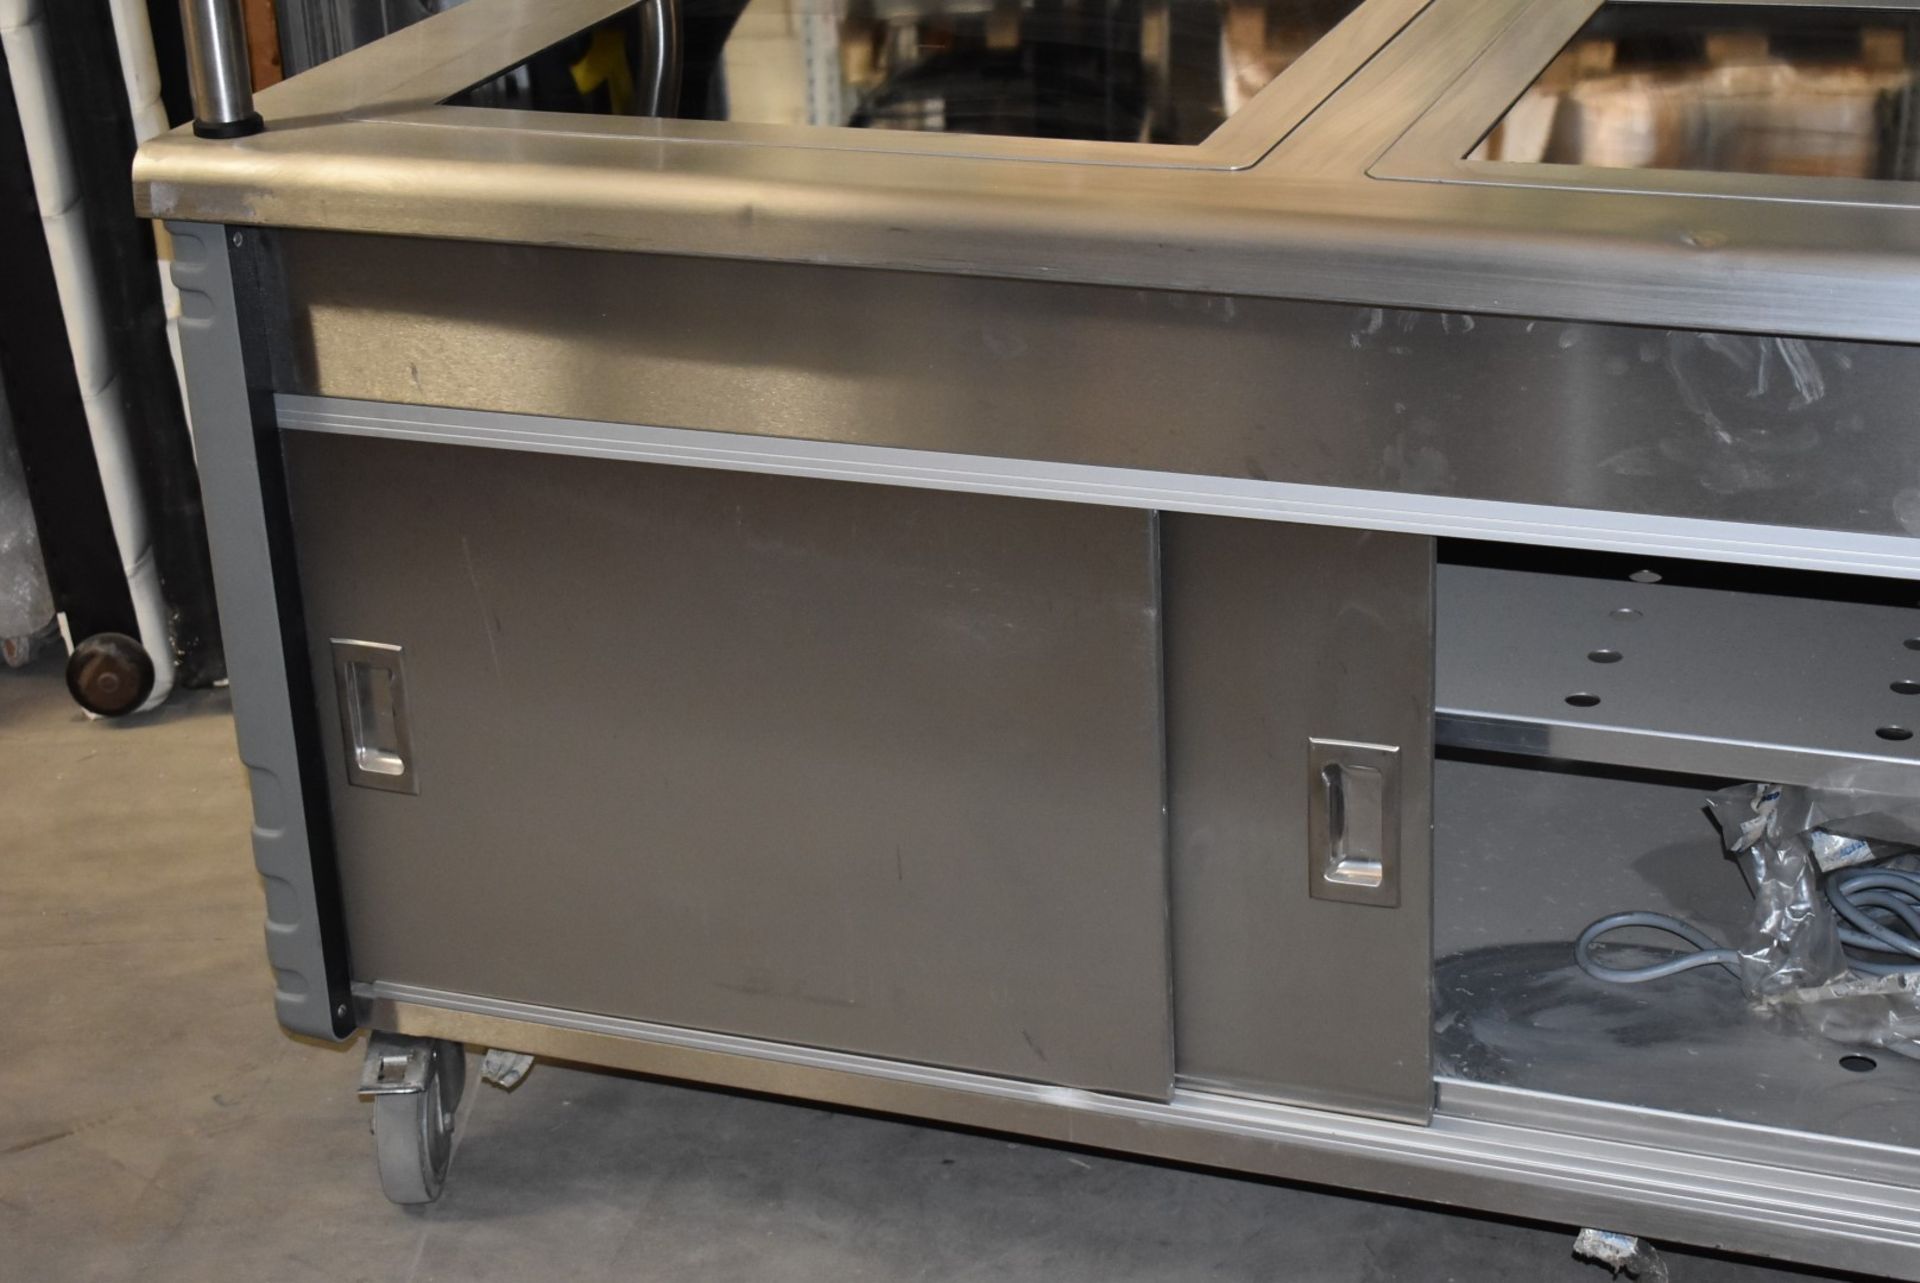 1 x Grundy Commercial Carvery Unit With Twin Hot Plates, Overhead Warmer and Plate Warming Cabinet - Image 2 of 21